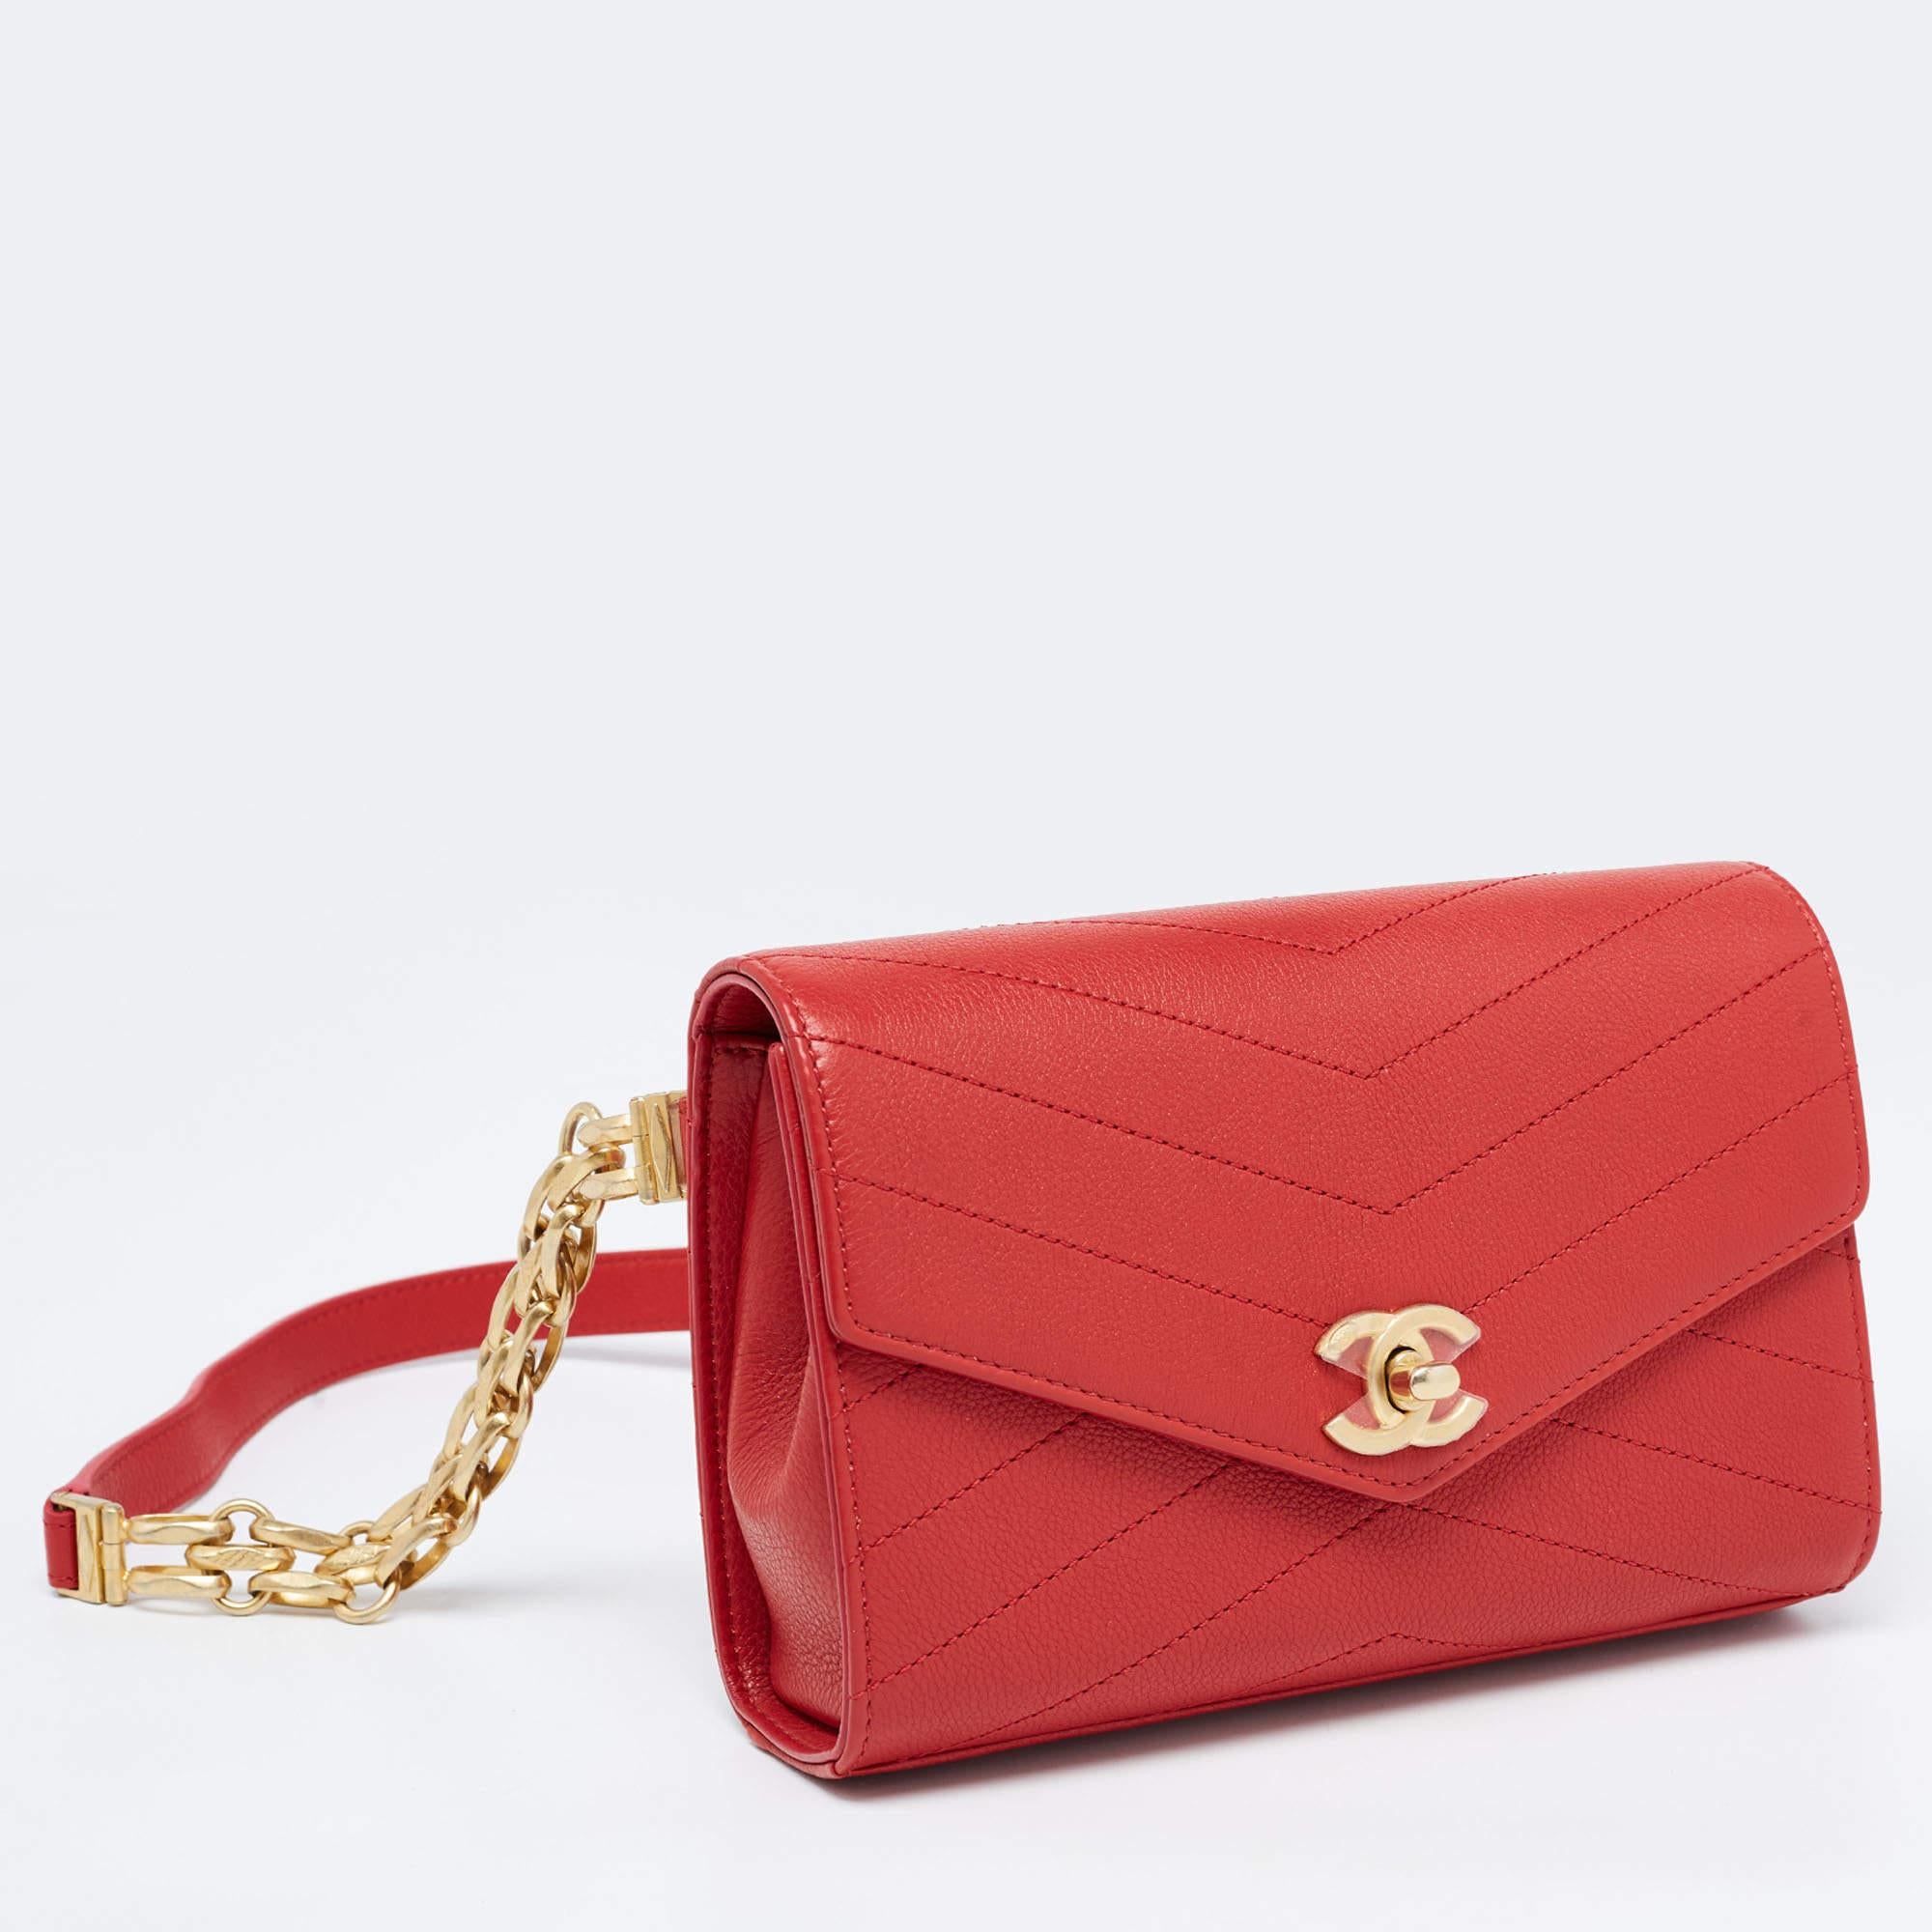 Skilfully designed to deliver an immaculate finish, this bag from Chanel will be a loved accessory. At once simple and fashionable, the belt bag comes made of chevron-quilted leather, and it has a flap with the CC logo, a leather compartment, and an